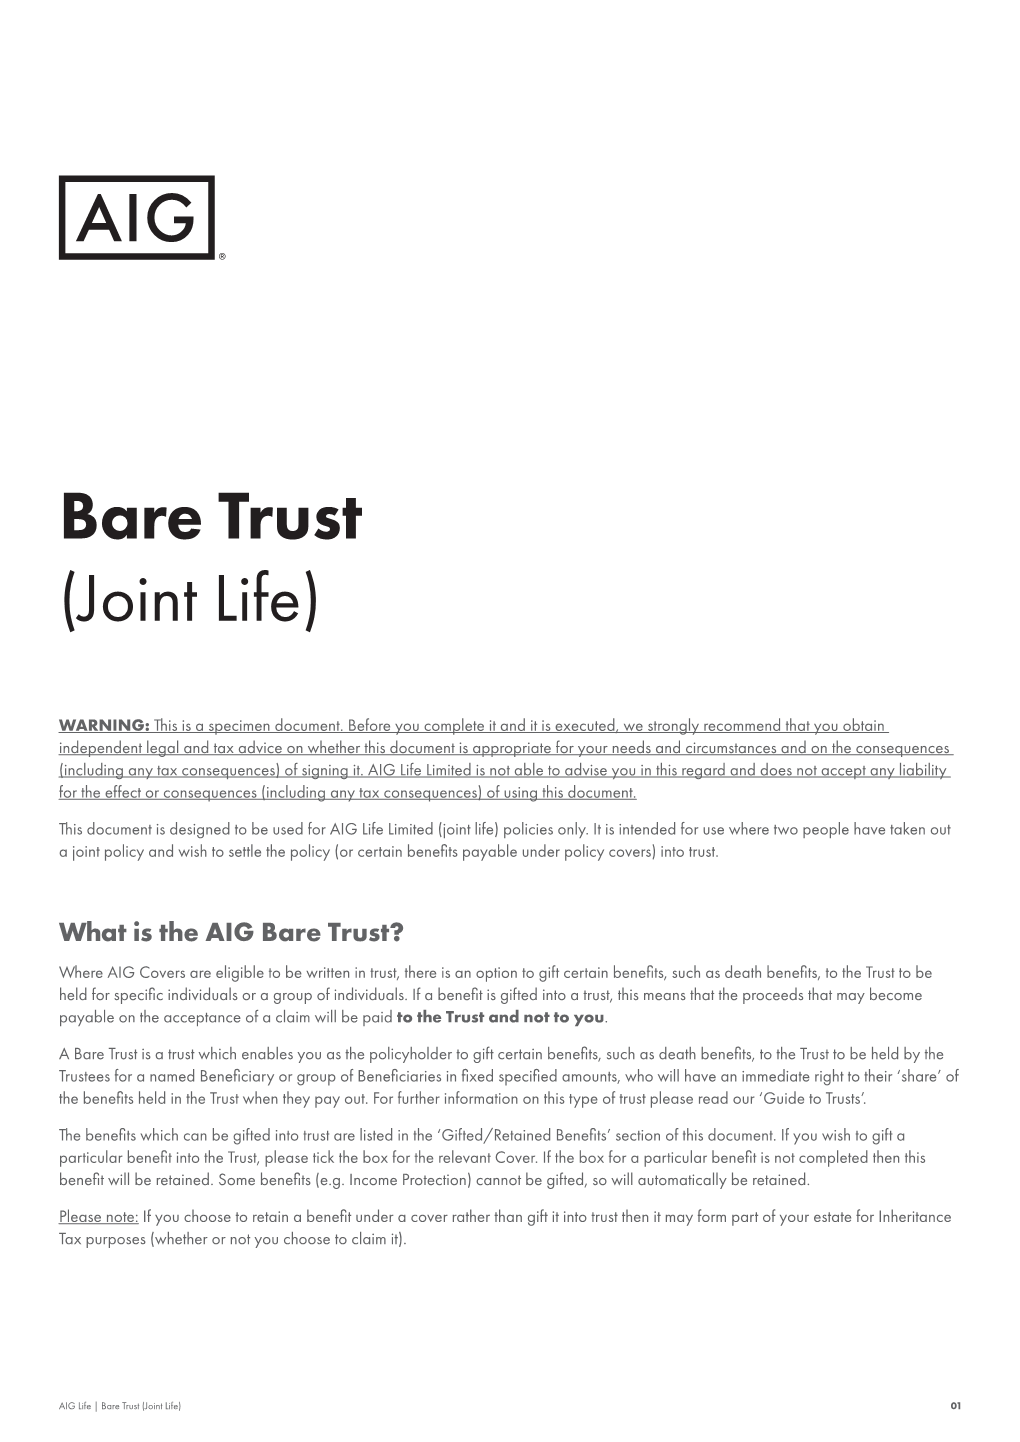 Bare Trust (Joint Life)